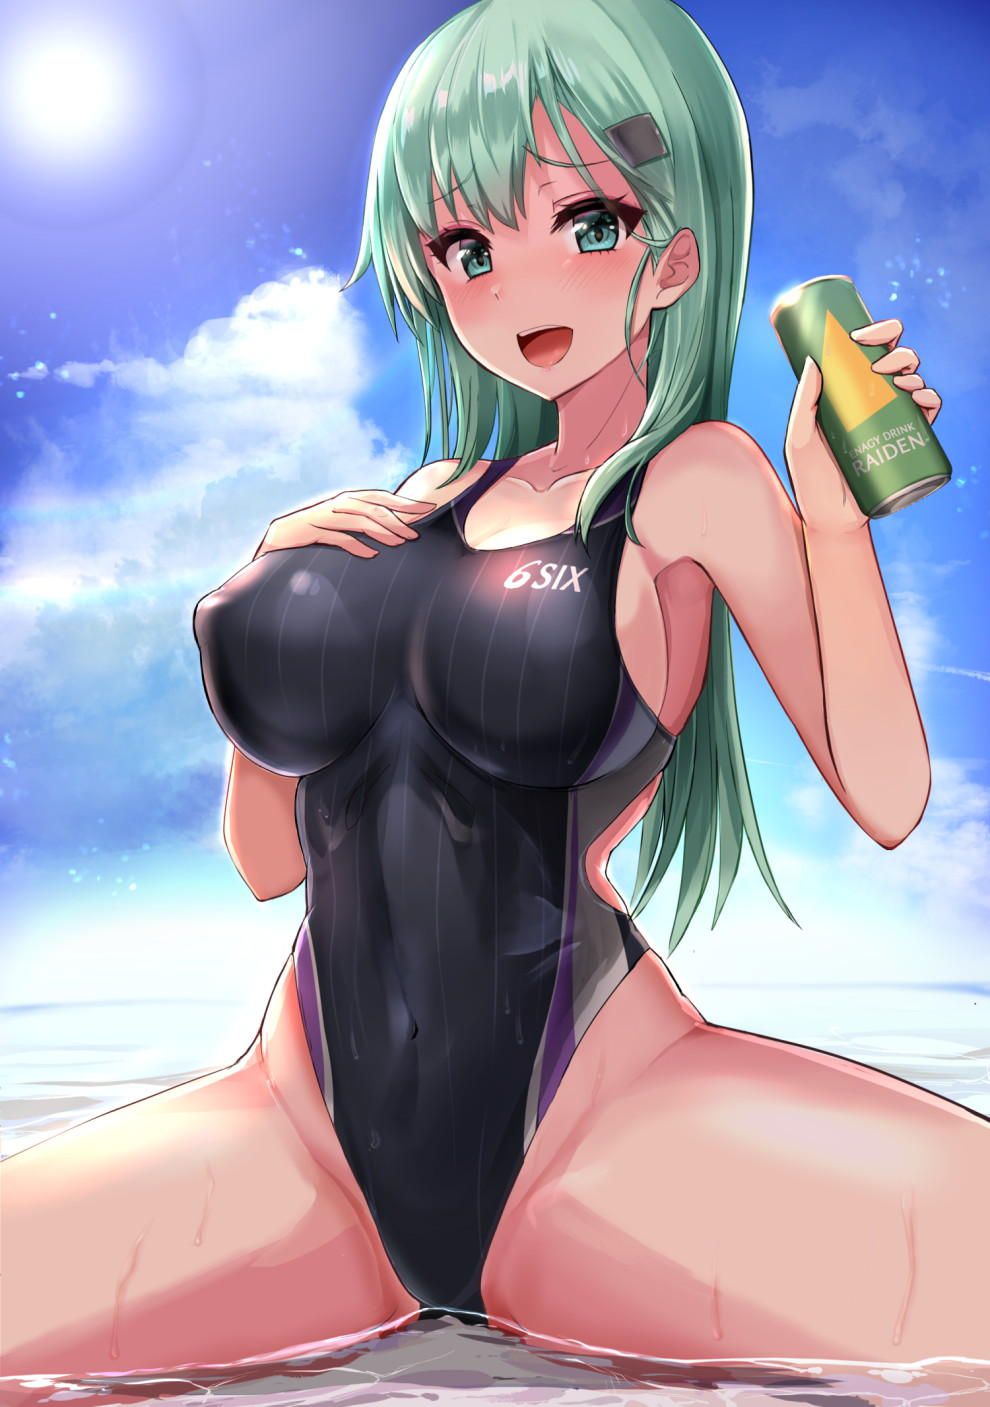 Please take an image of a swimming swimsuit! 15